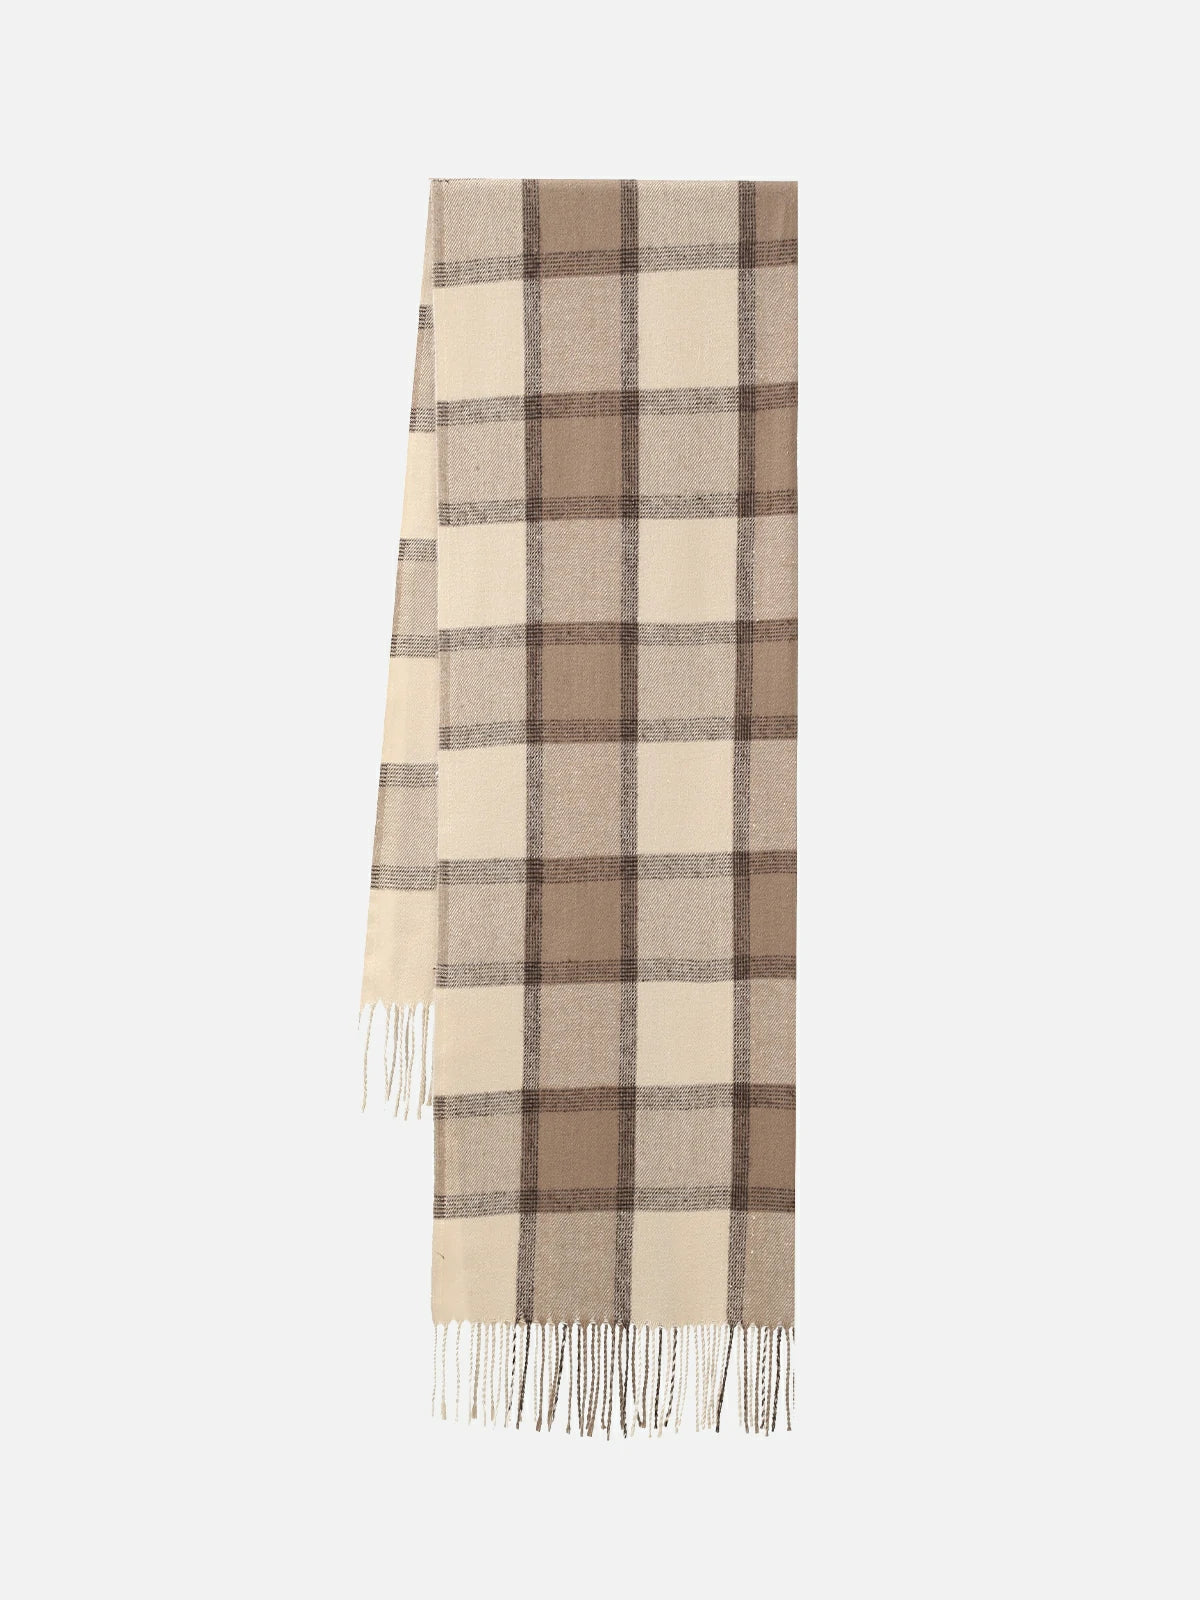 Soft Fringe Scarf for Cold Seasons: Stay warm in style.